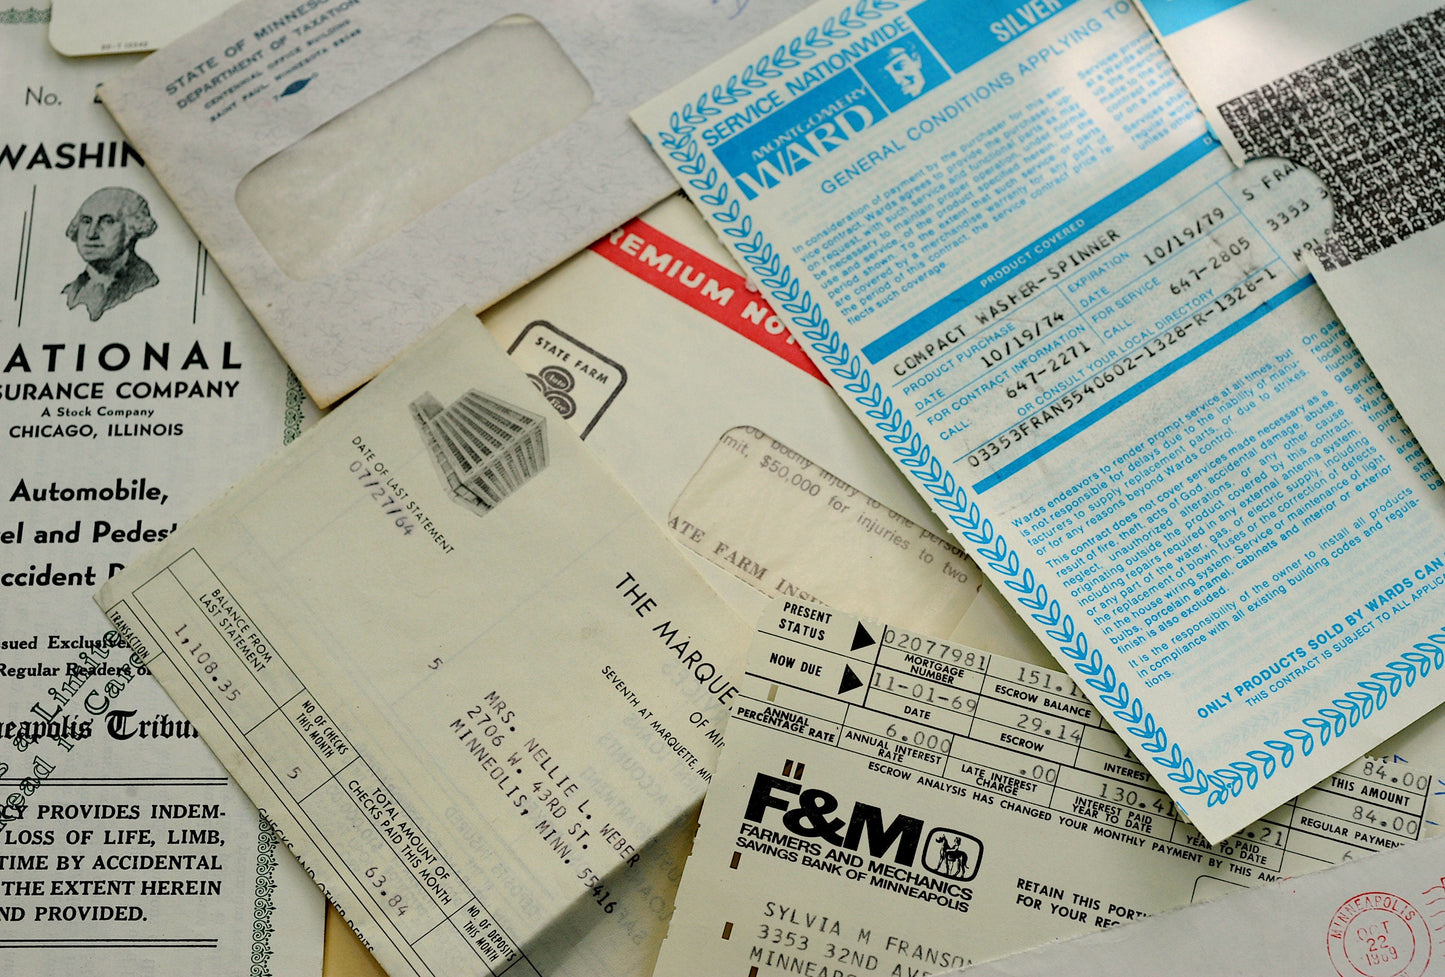 Papers for repurposing: vintage records/paperwork/documents